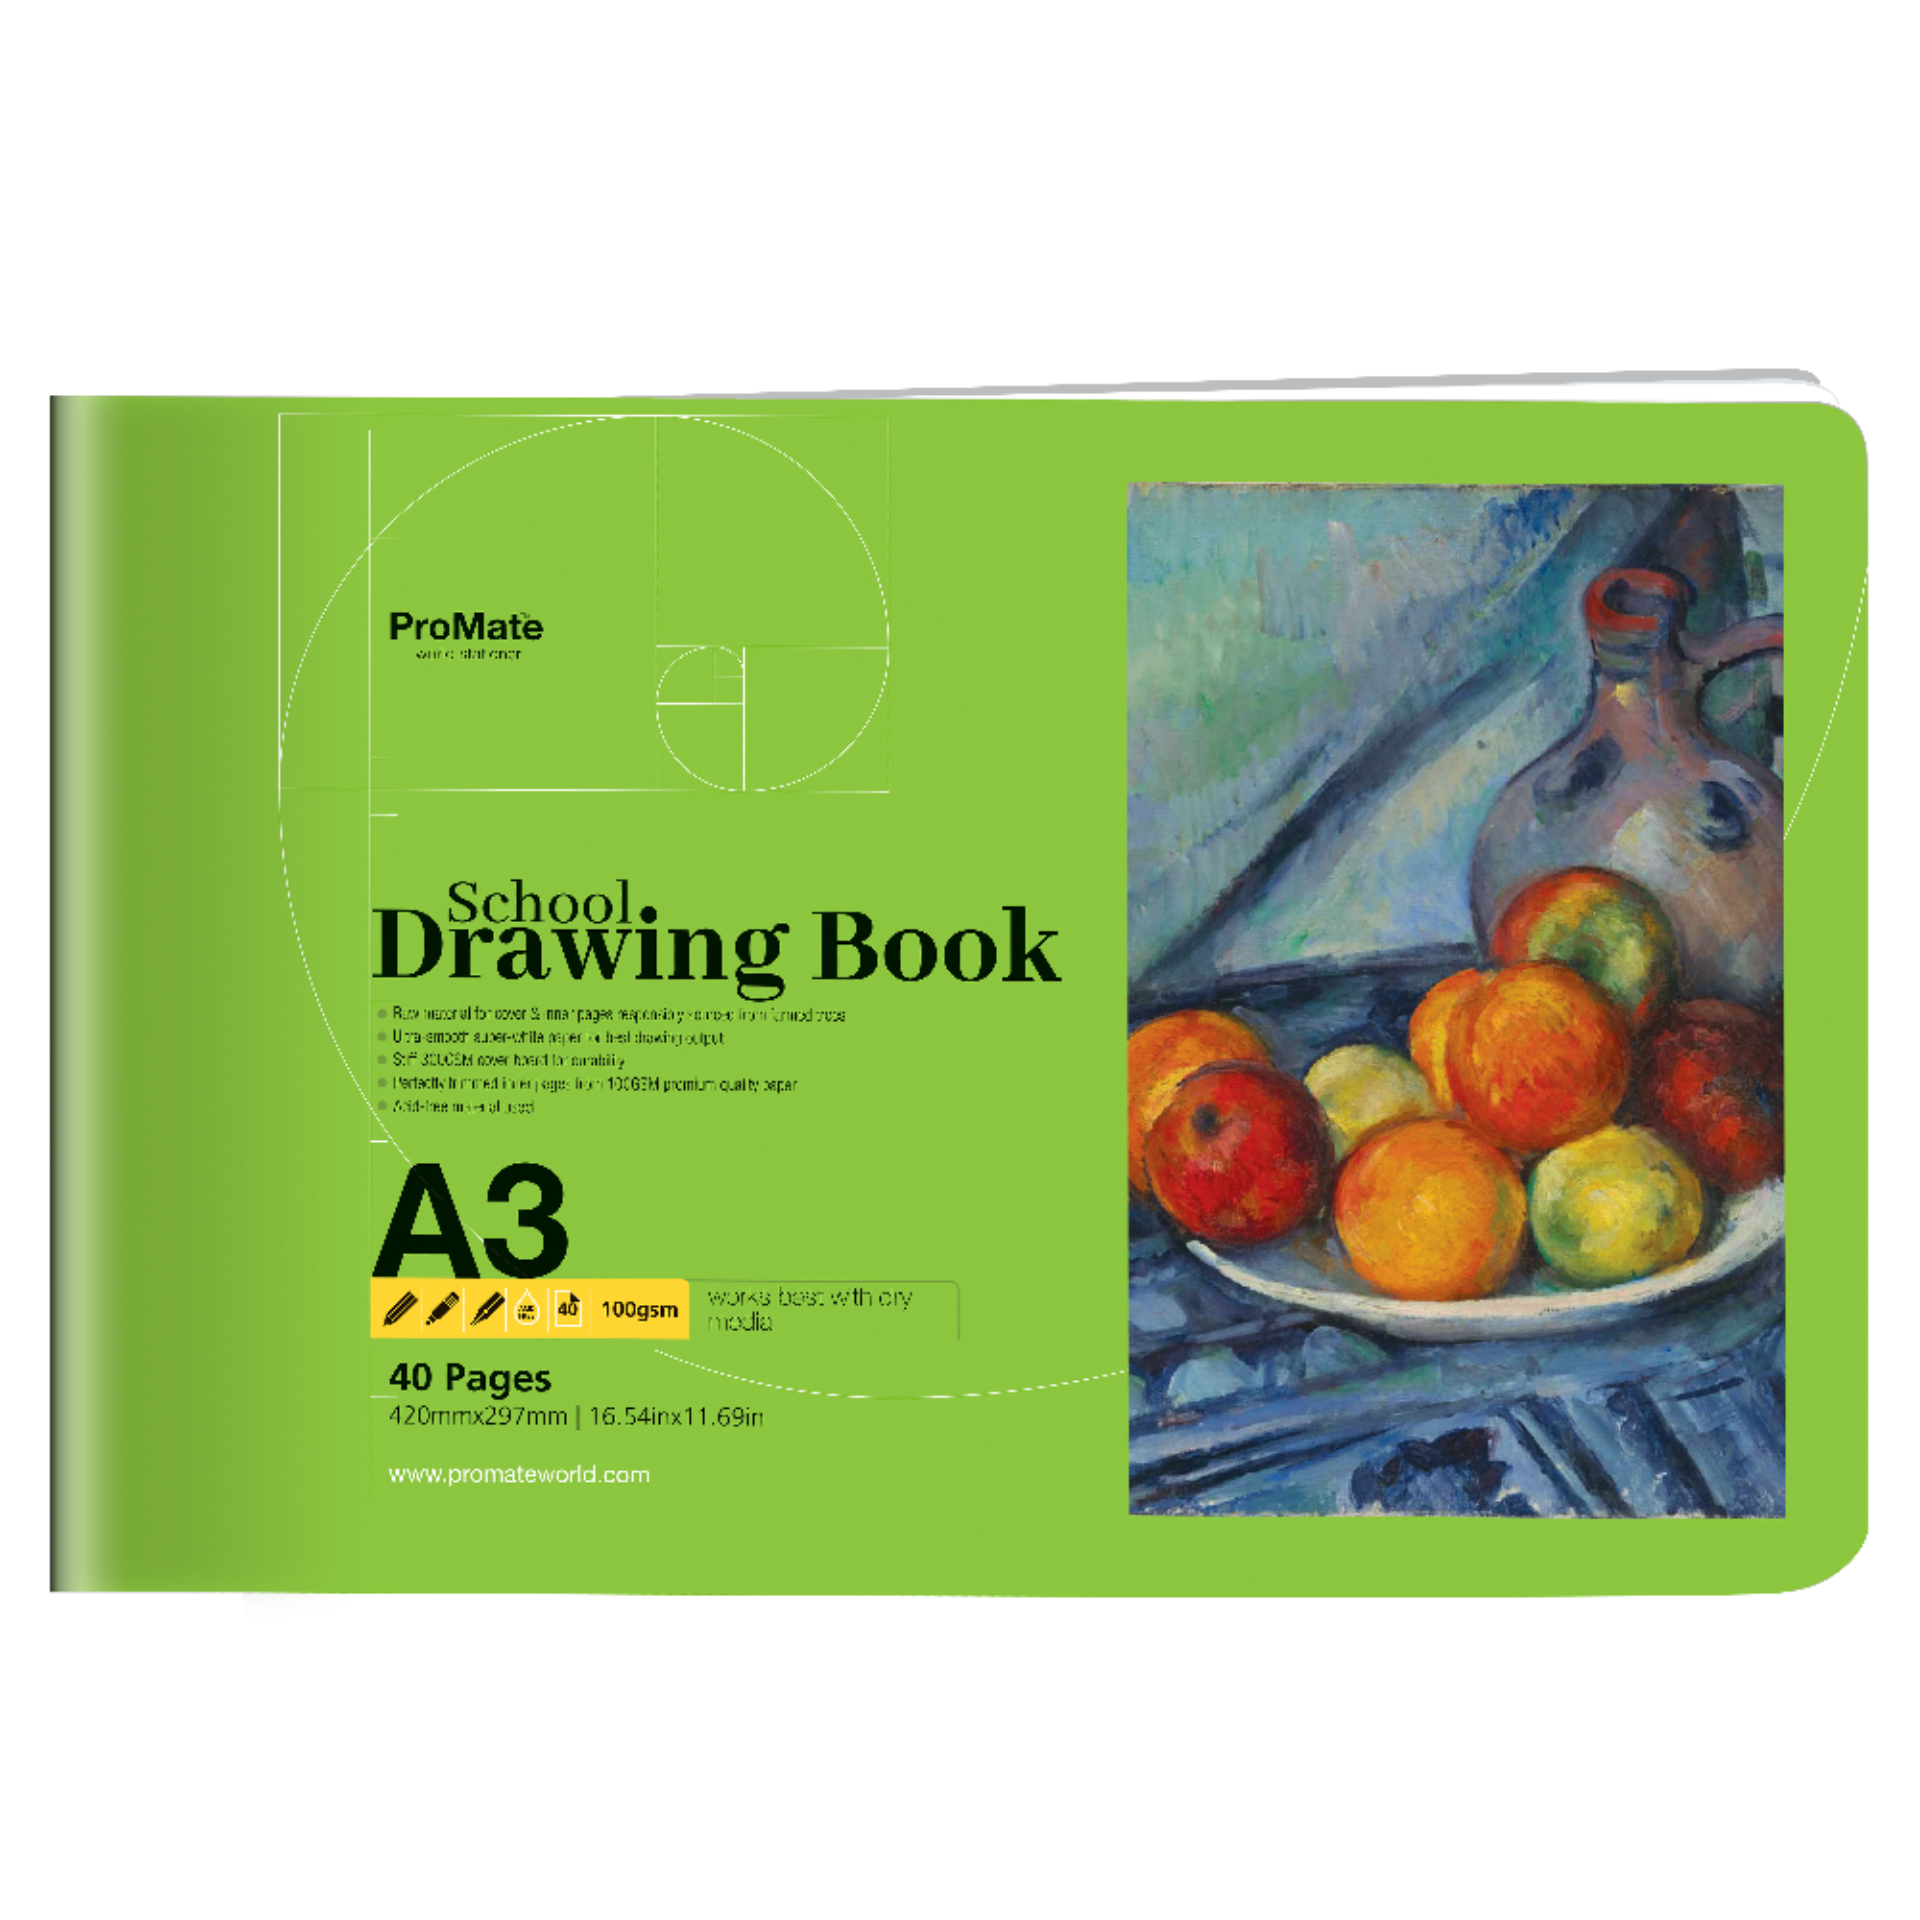 Promate School Drawing Book A3 40 Pages 